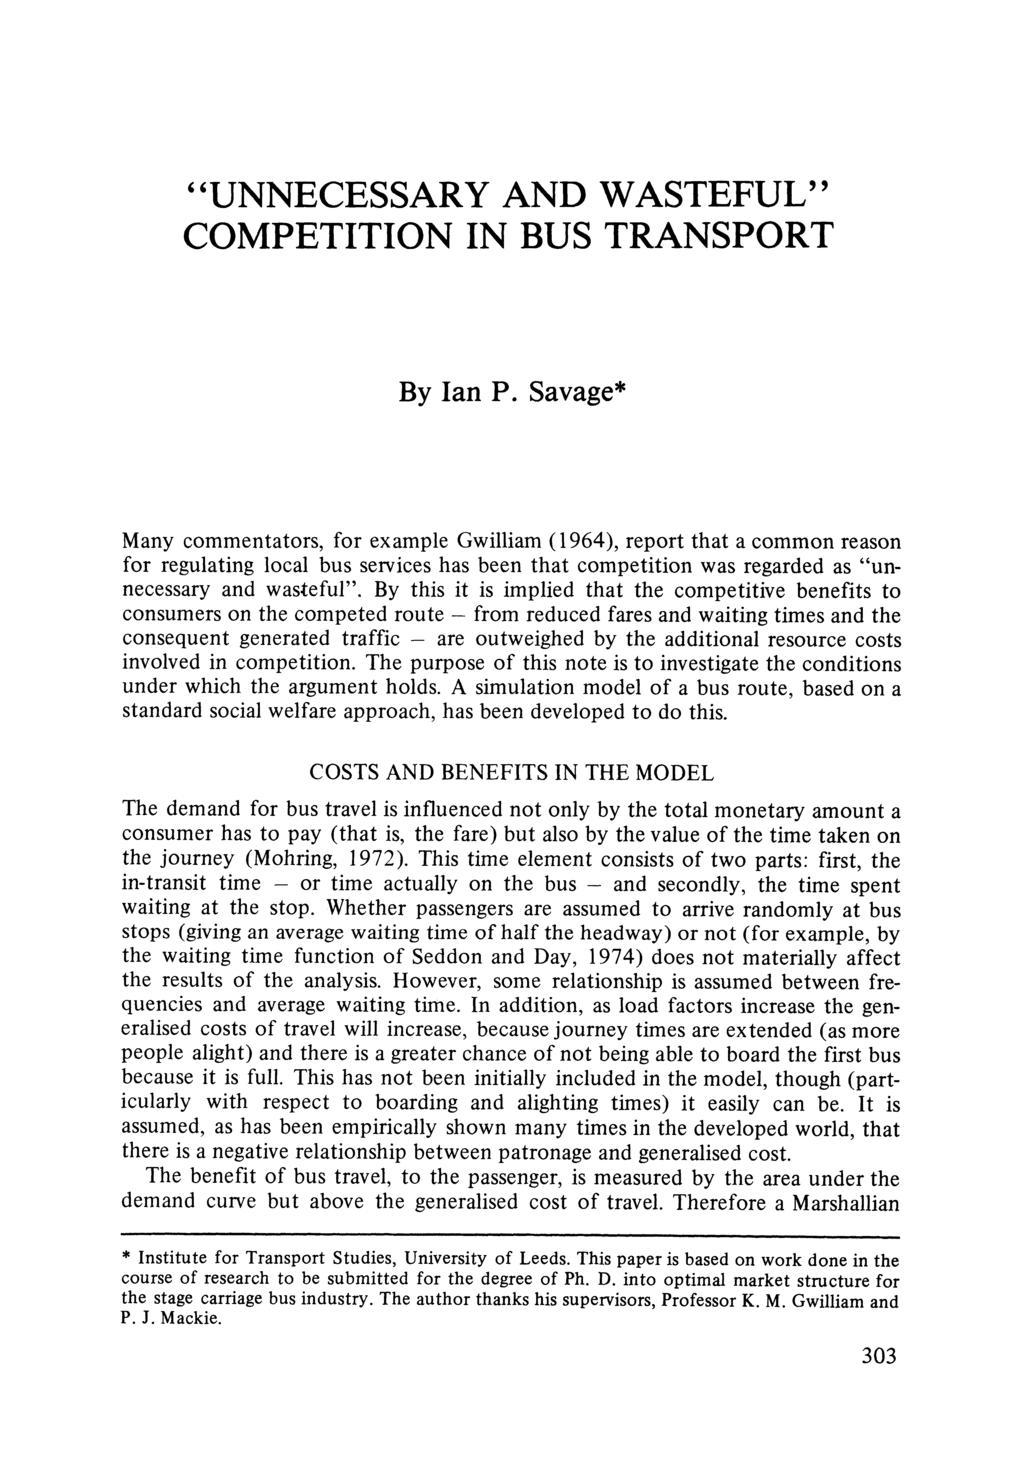 "UNNECESSARY COMPETITION AND WASTEFUL" IN BUS TRANSPORT By Ian P.